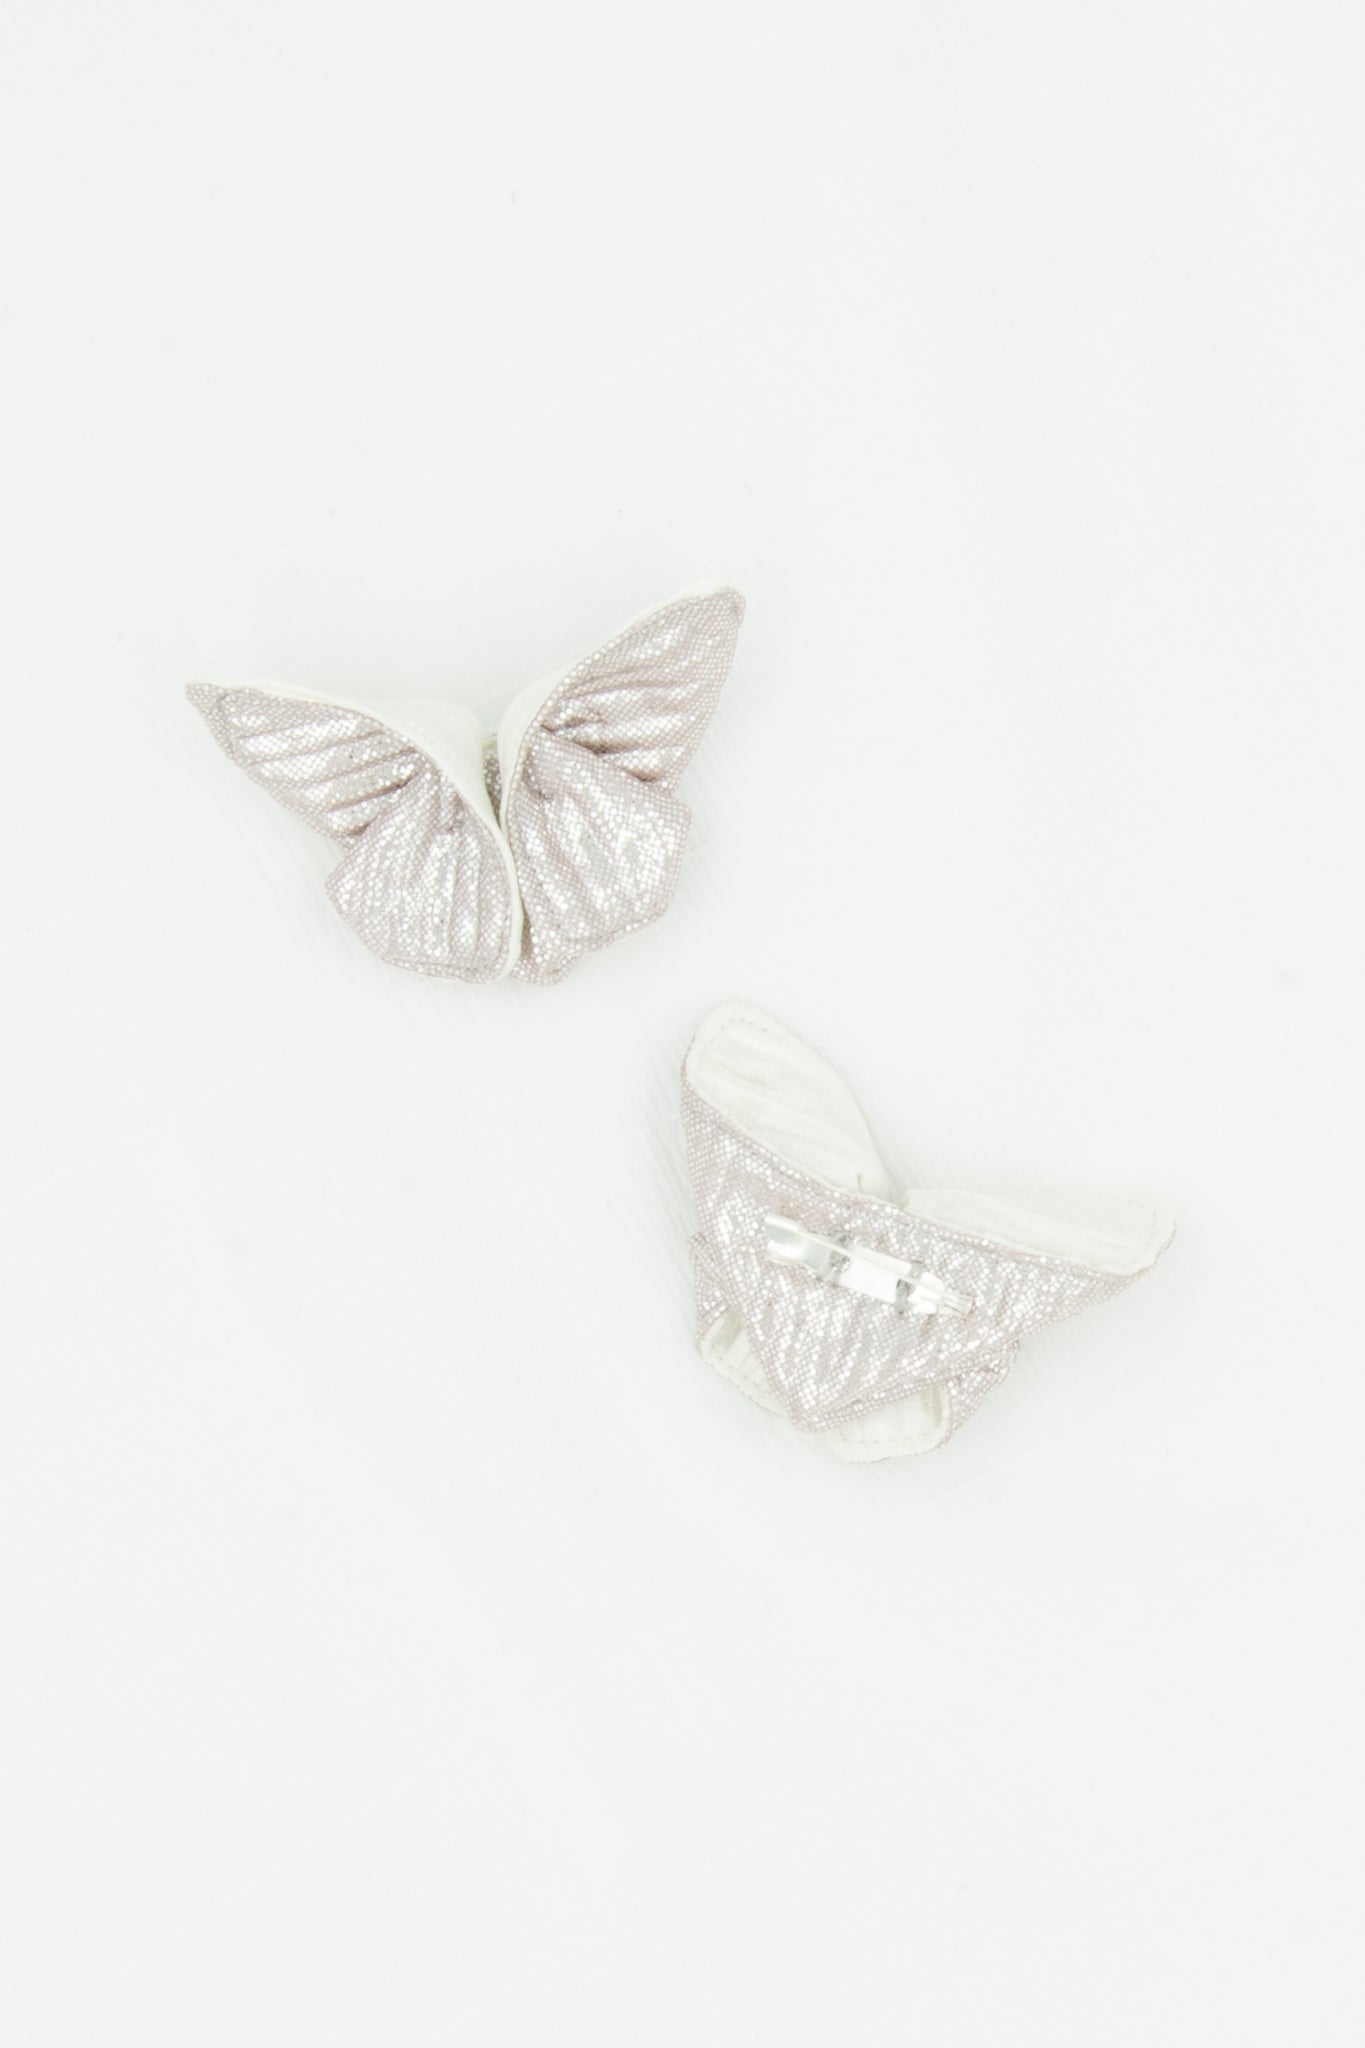 Butterfly Brooch in Metallic Silver and Ivory Plissé